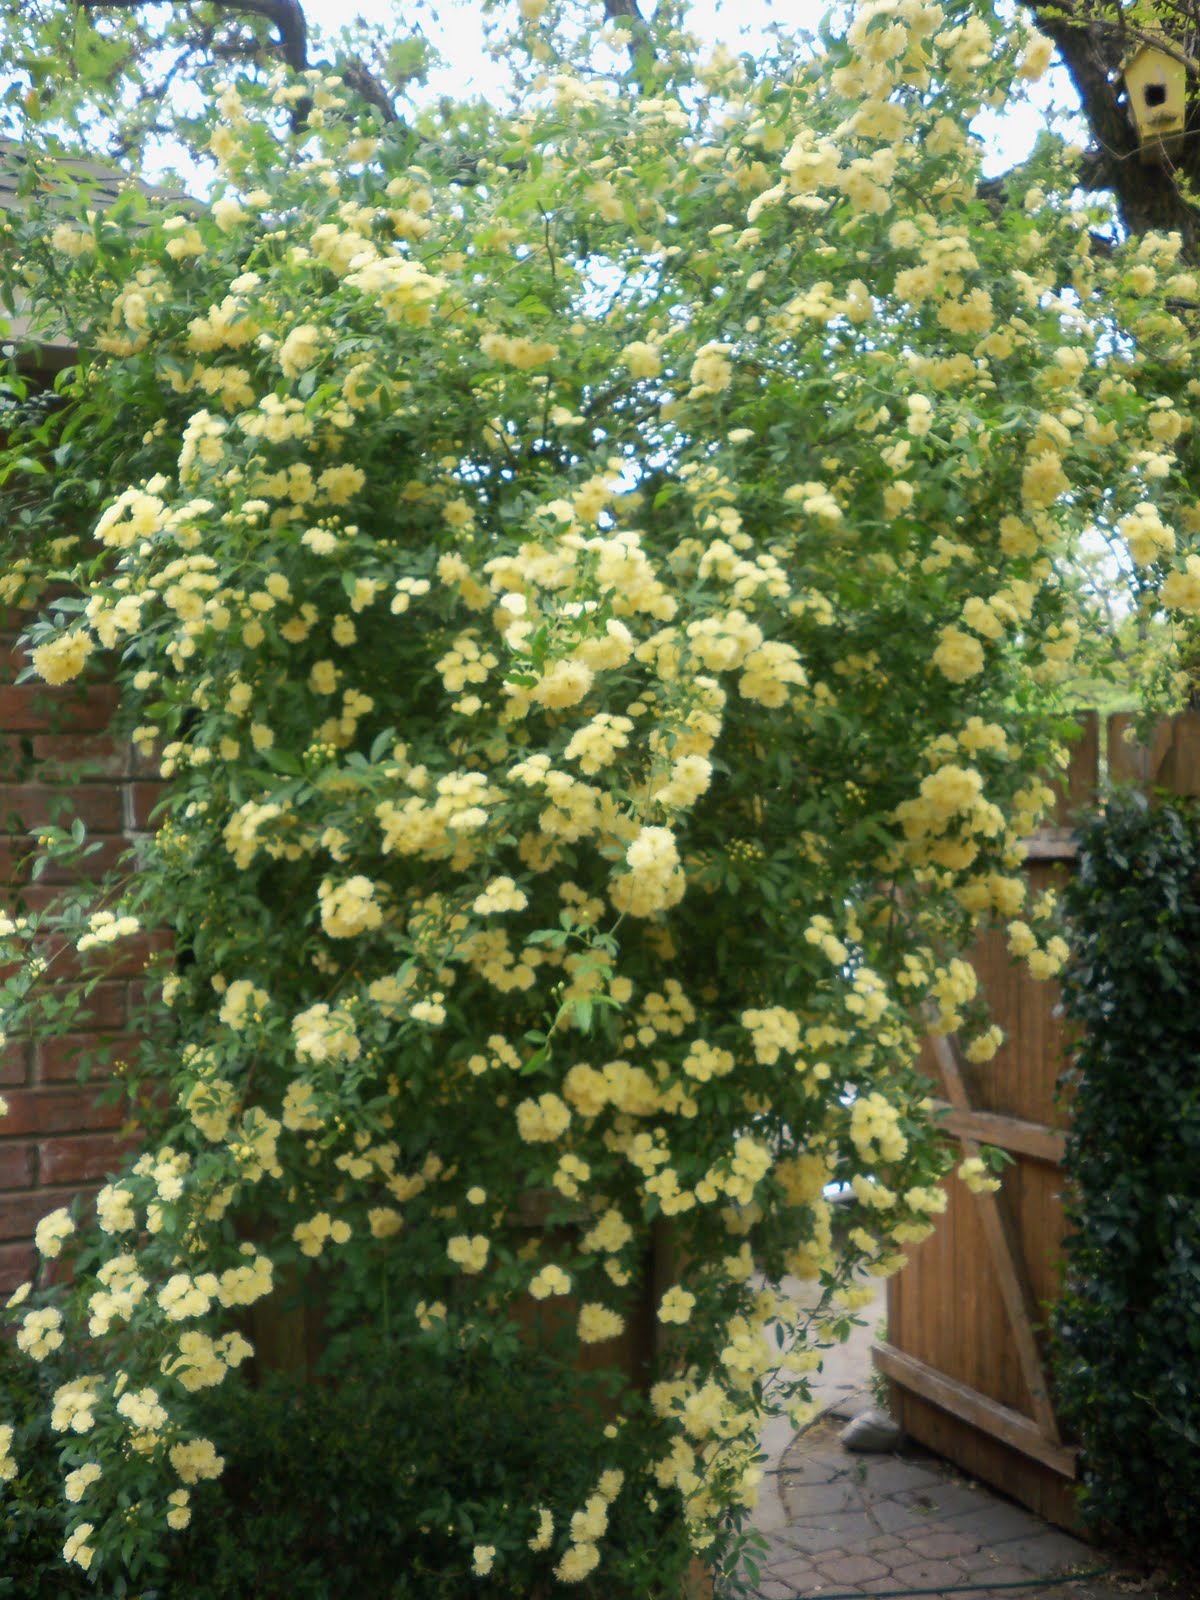 My Heart with Pleasure Fills: Before/After - Yellow climbing rose